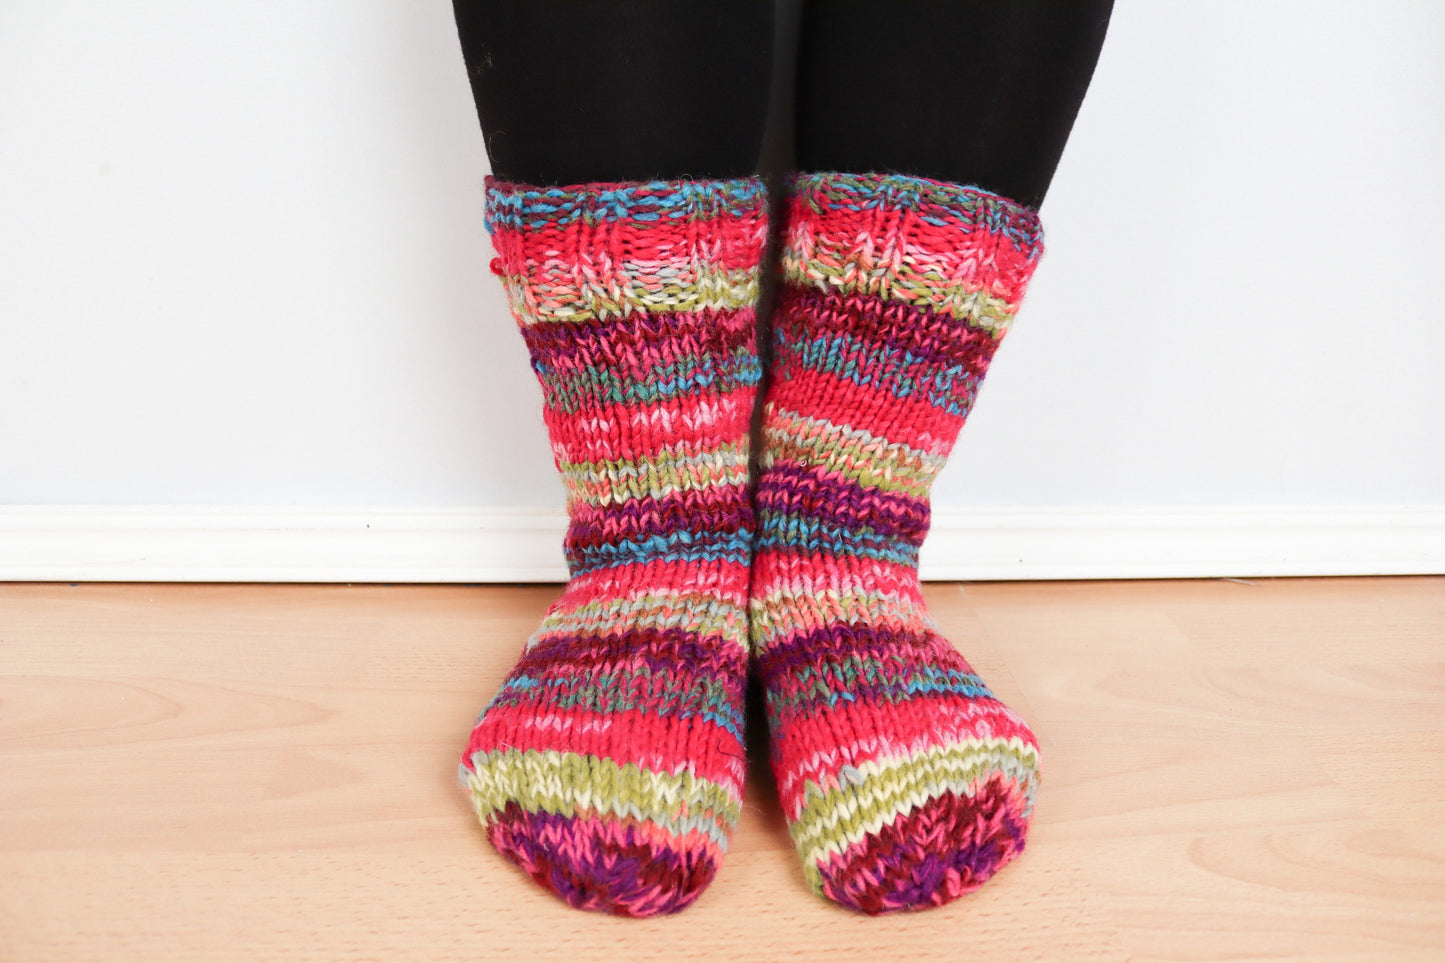 Long Cosy Knitted Sofa Socks - Pink - Bare Canvas